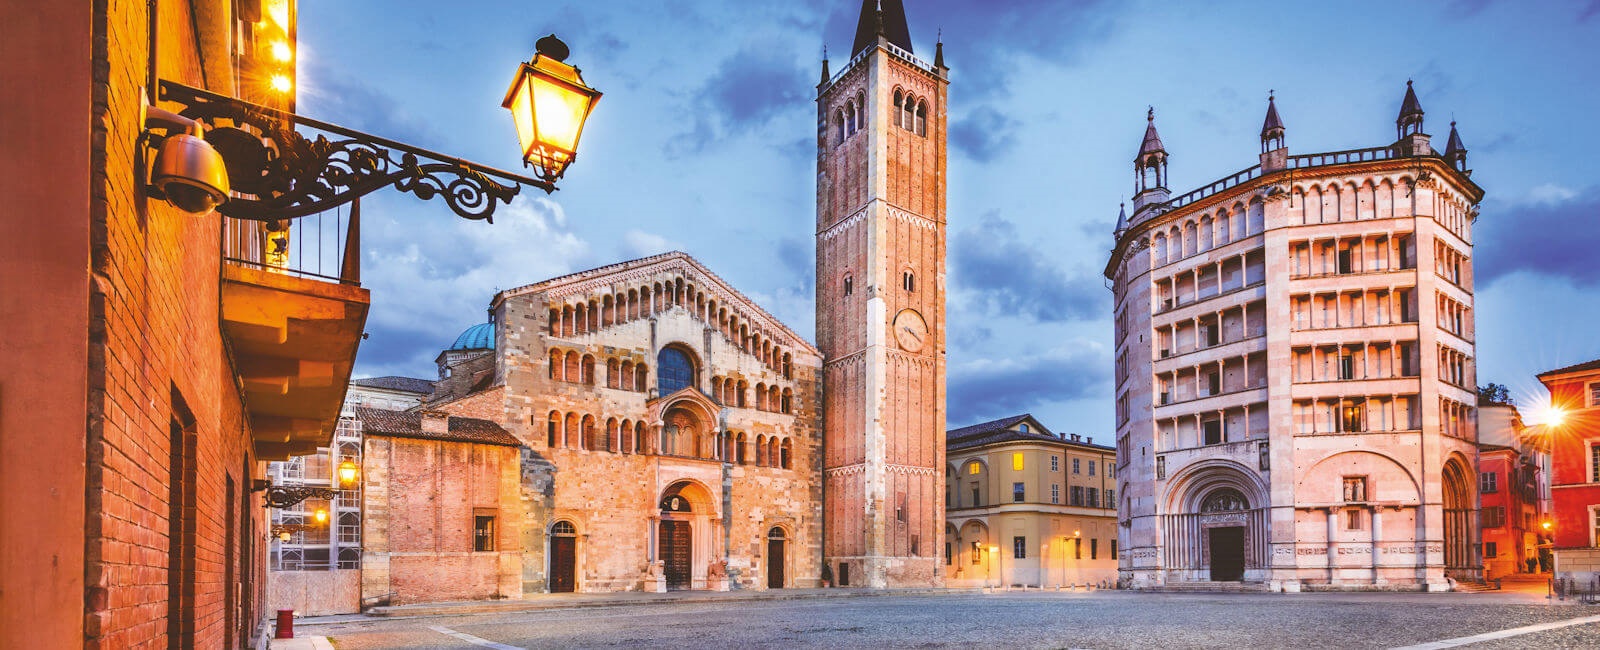 Luxury Parma, Italy Holidays 2022/23 | Classic Collection Holidays